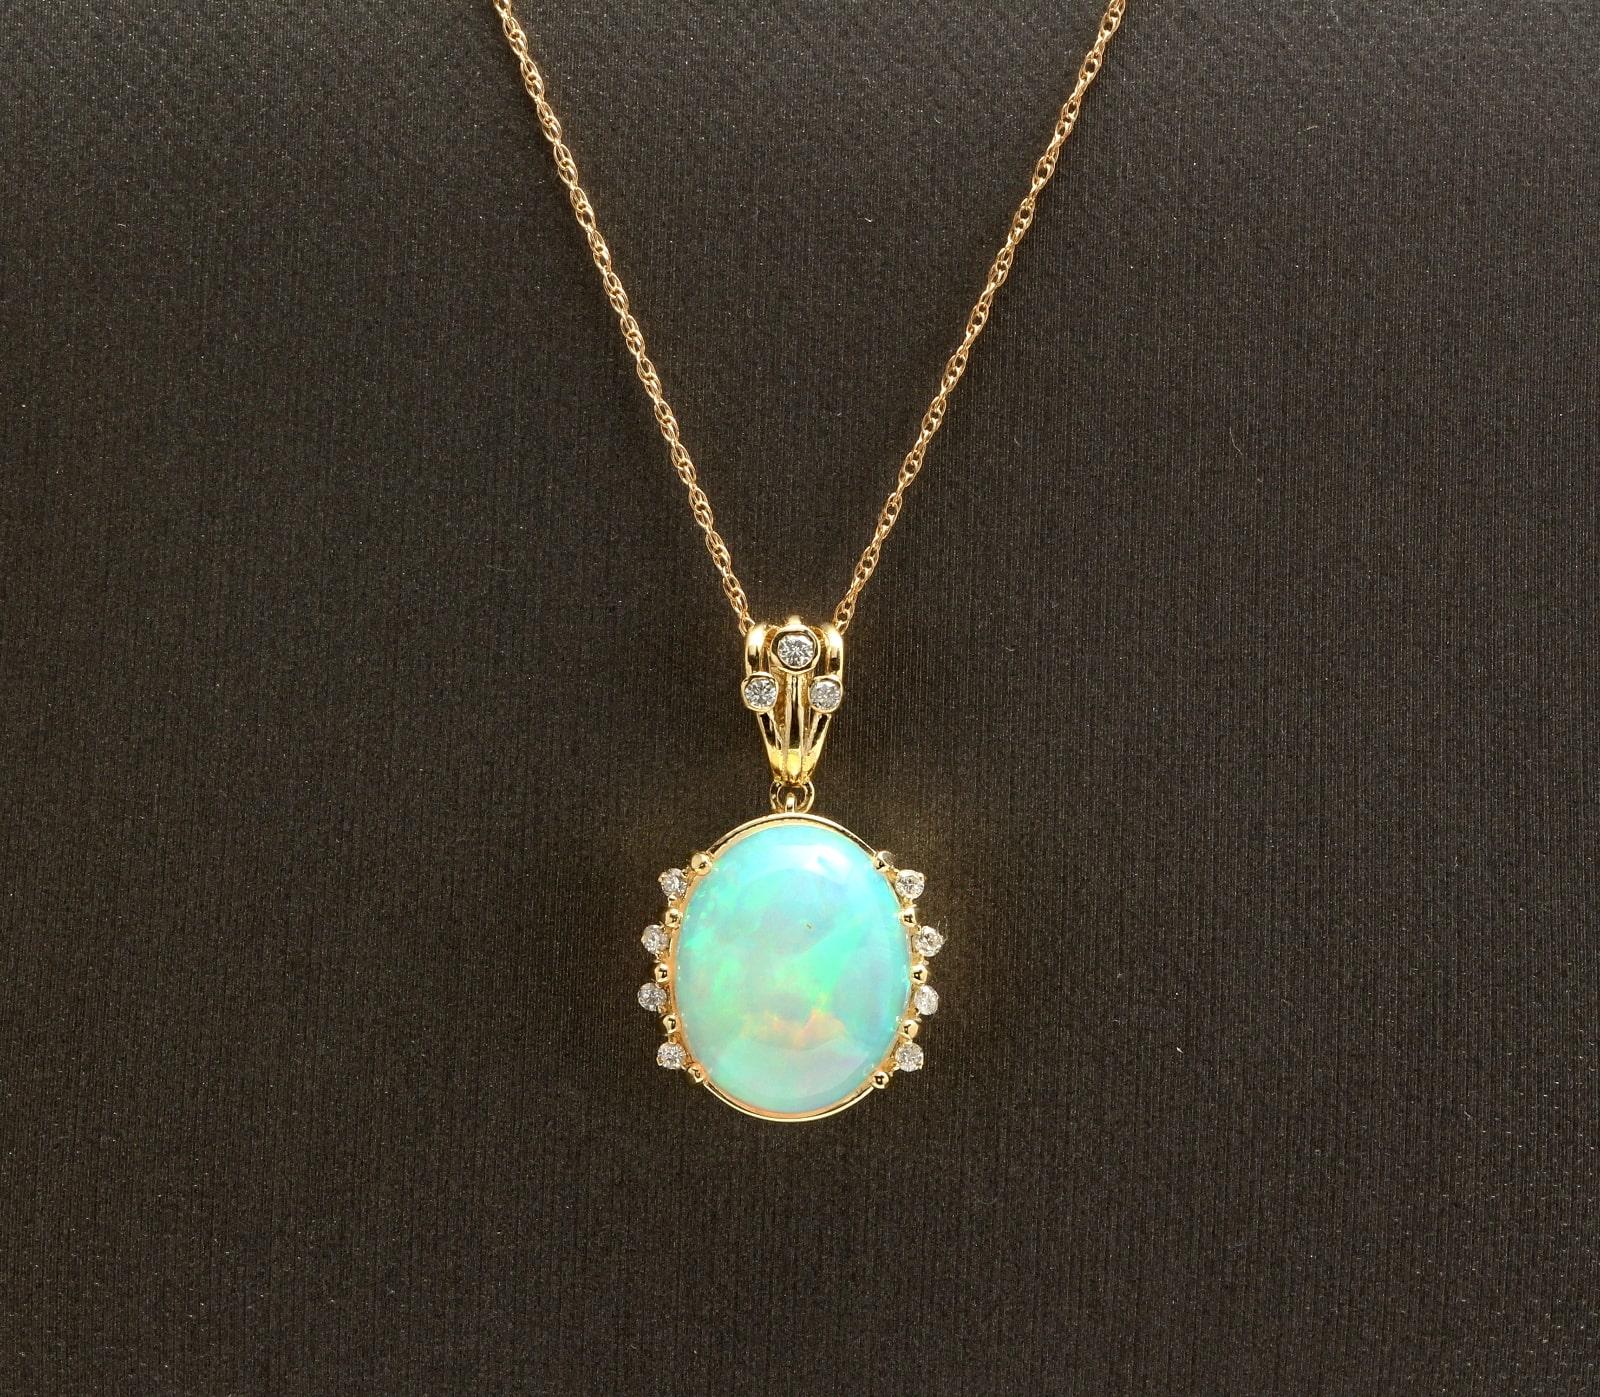 6.70Ct Natural Ethiopian Opal and Diamond 14K Solid Yellow Gold Necklace

Amazing looking piece! 

Stamped: 14K

Suggested Replacement Value: $4,500.00 

Natural Oval Cut Opal Weights: Approx. 6.50 Carats 

Opal Measures: Approx. 15.00 x